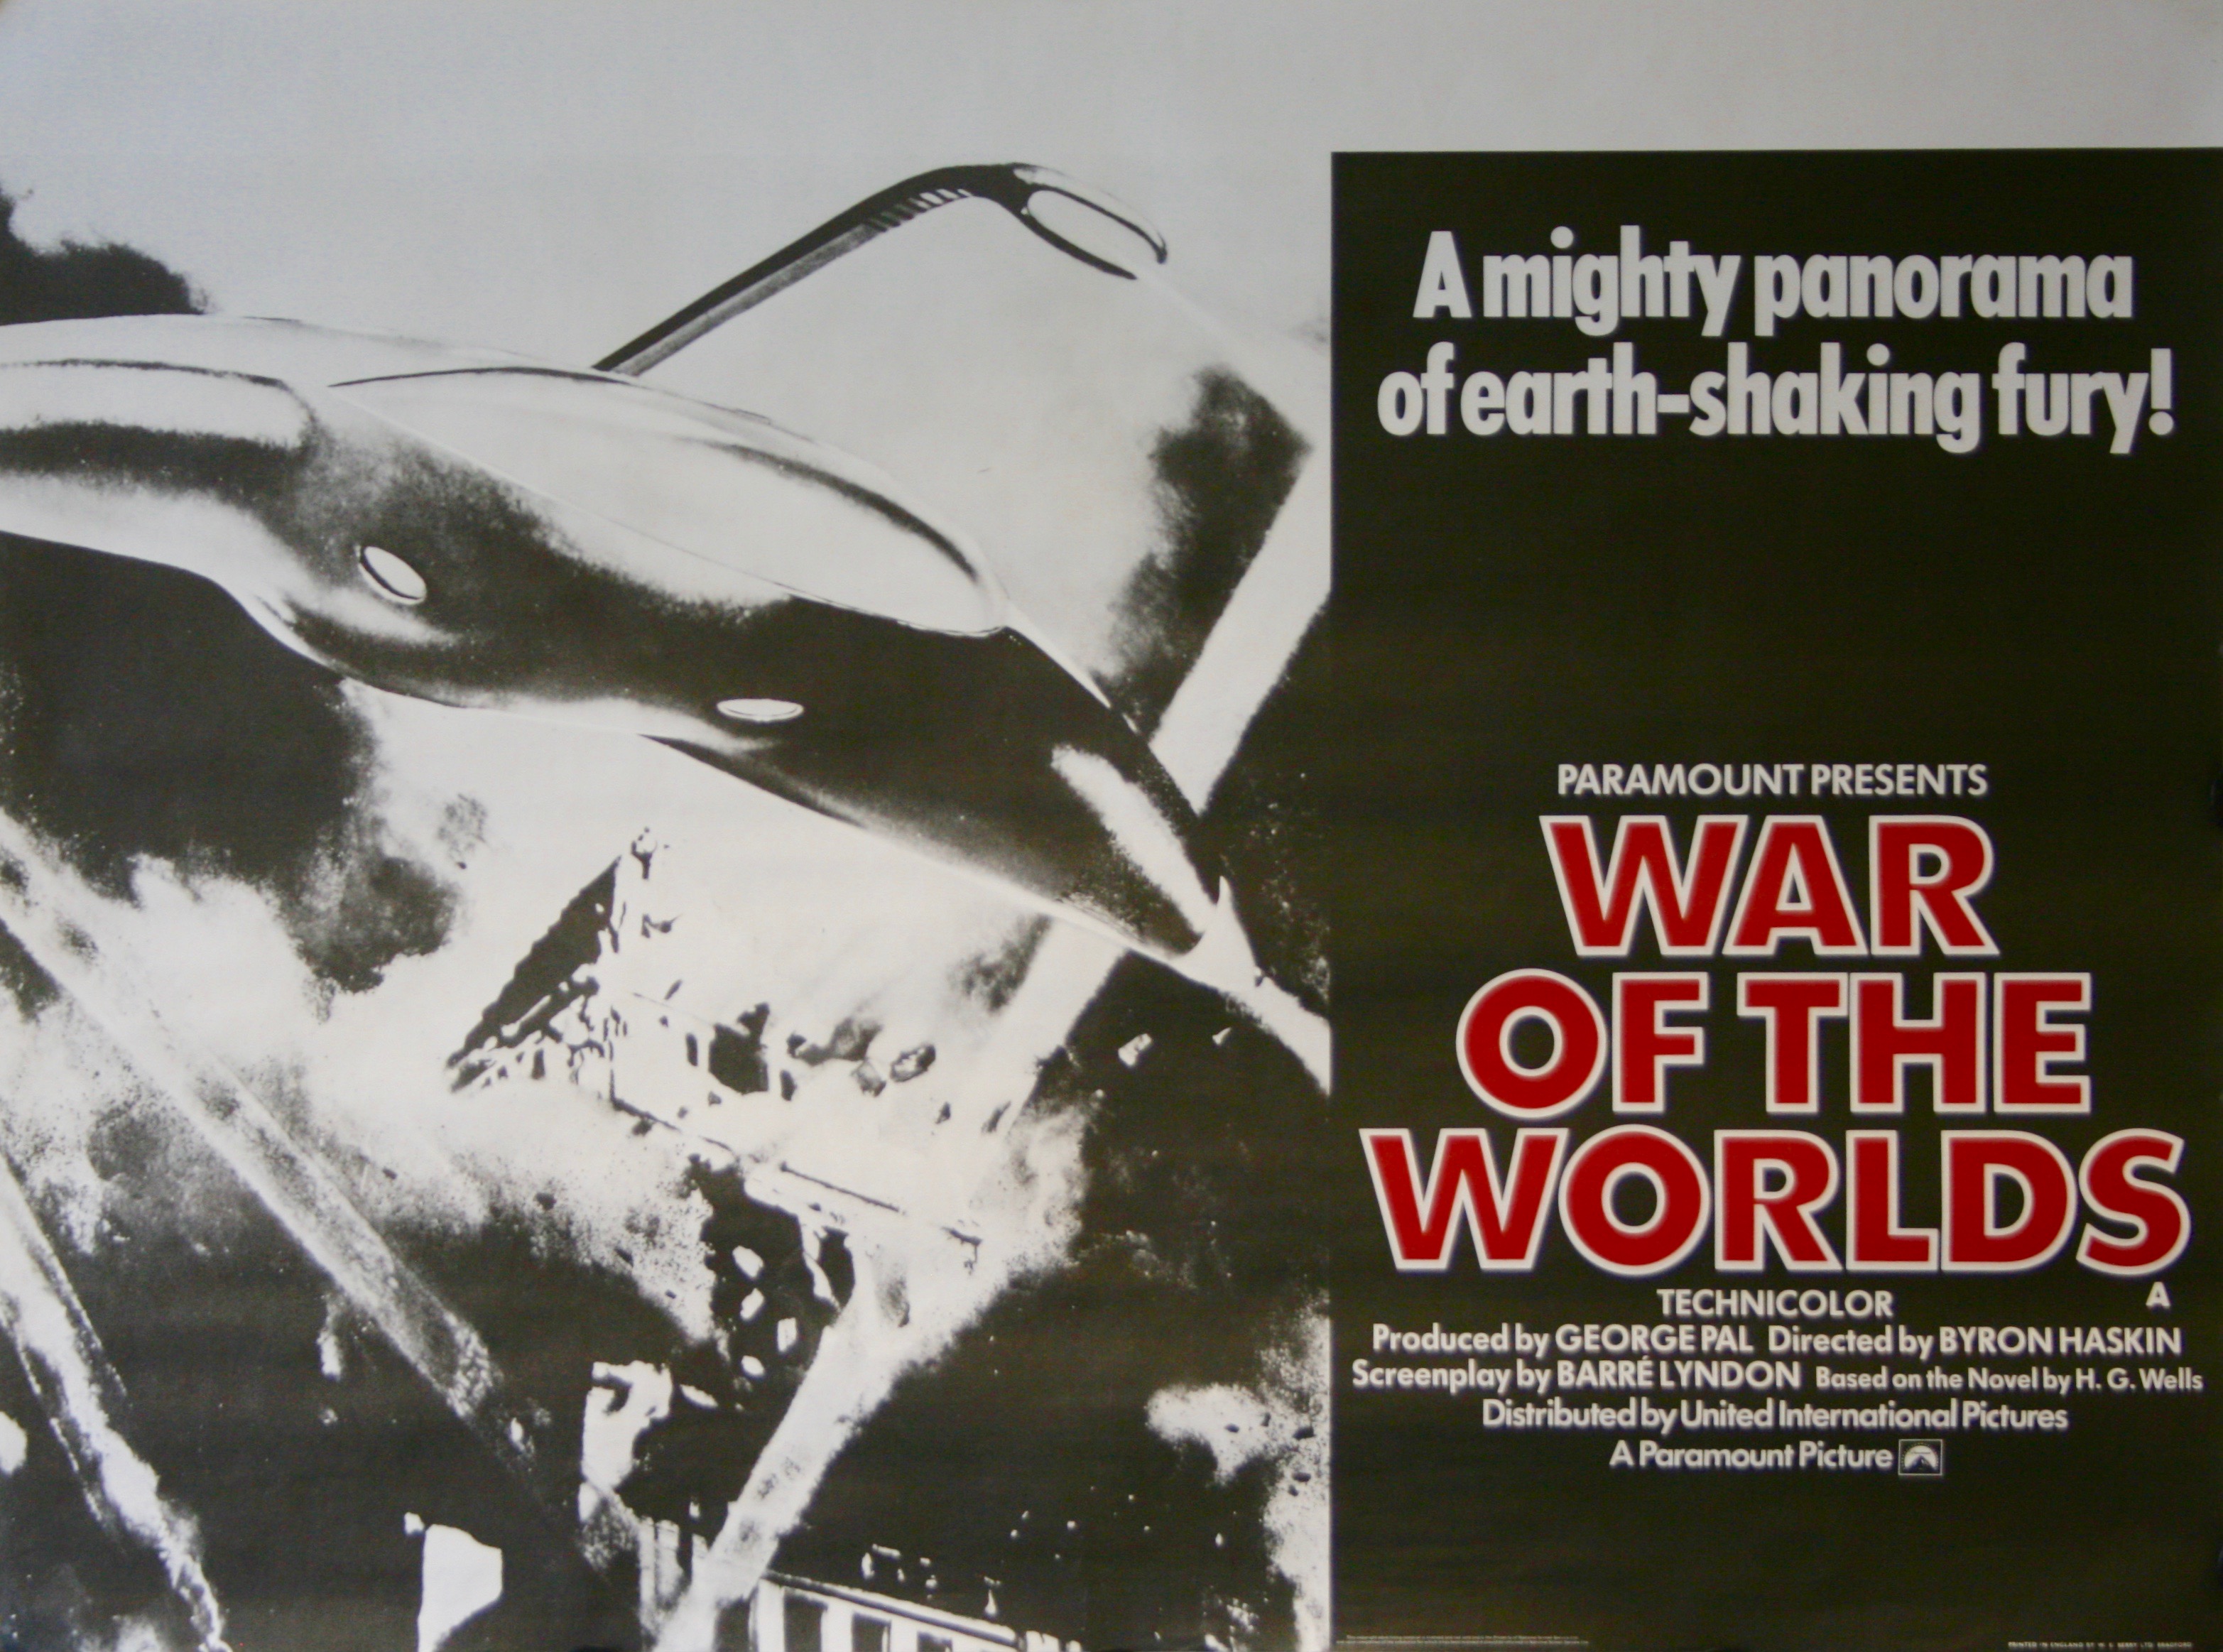 war of the worlds movie poster 1953